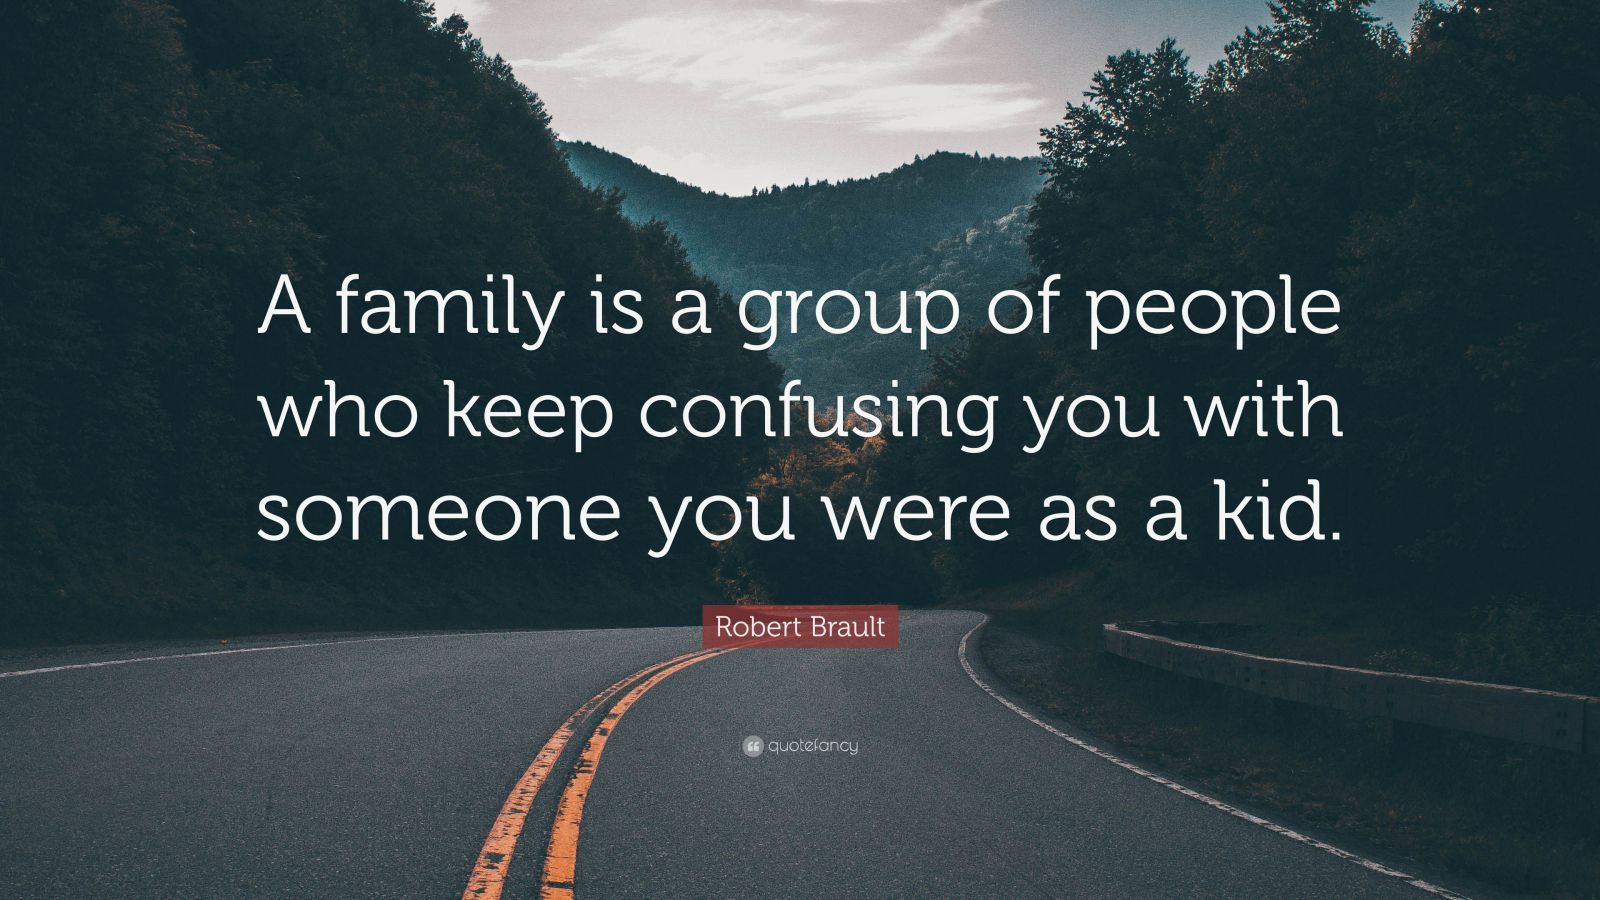 “A family is a group of people who keep confusing you with someone you were as a kid.”